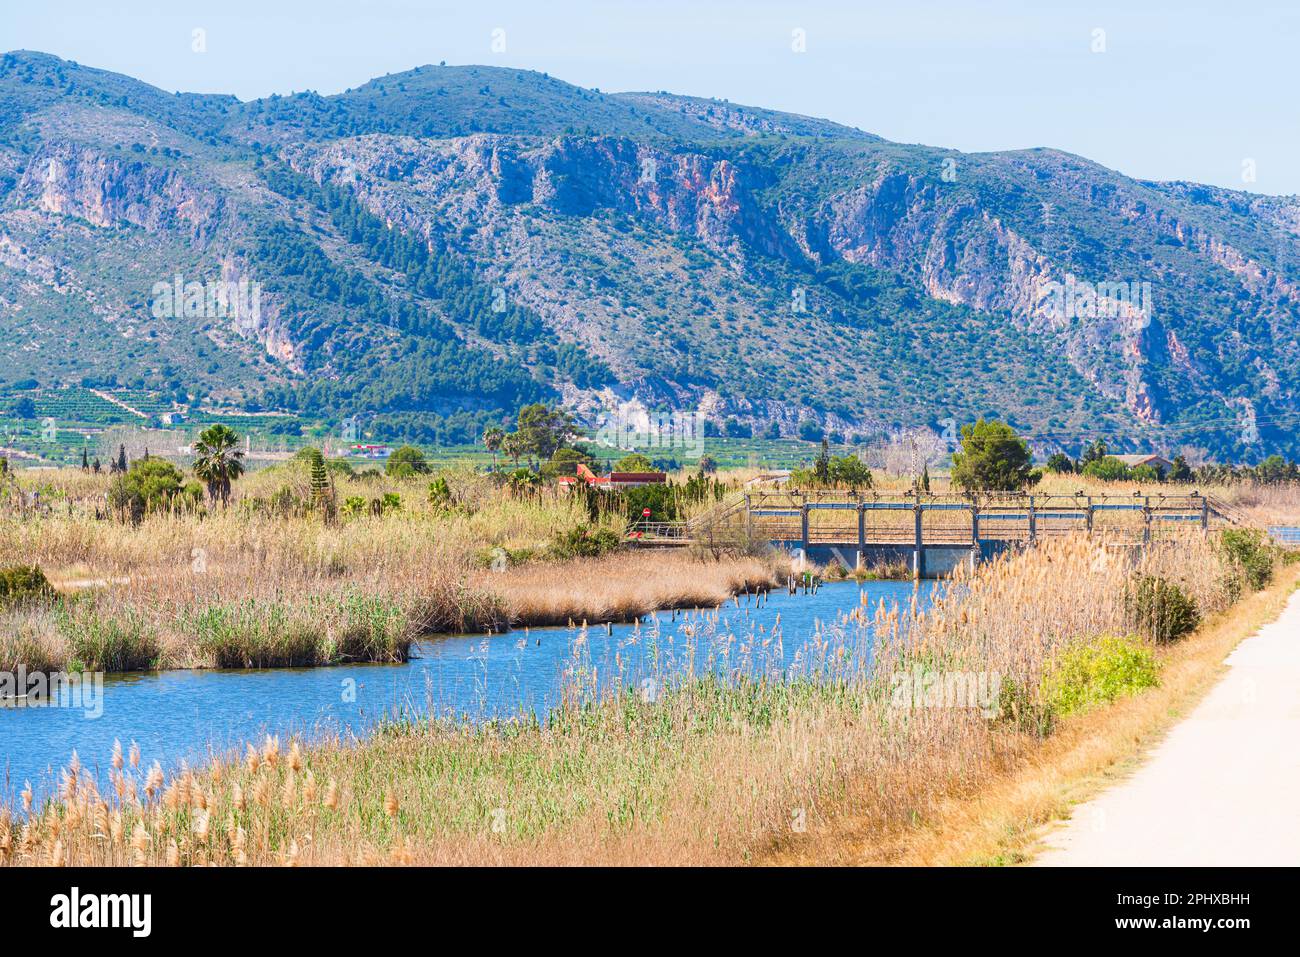 View of the Cow River with mountains in the background, Xeraco, Region of Valencia, Spain Stock Photo